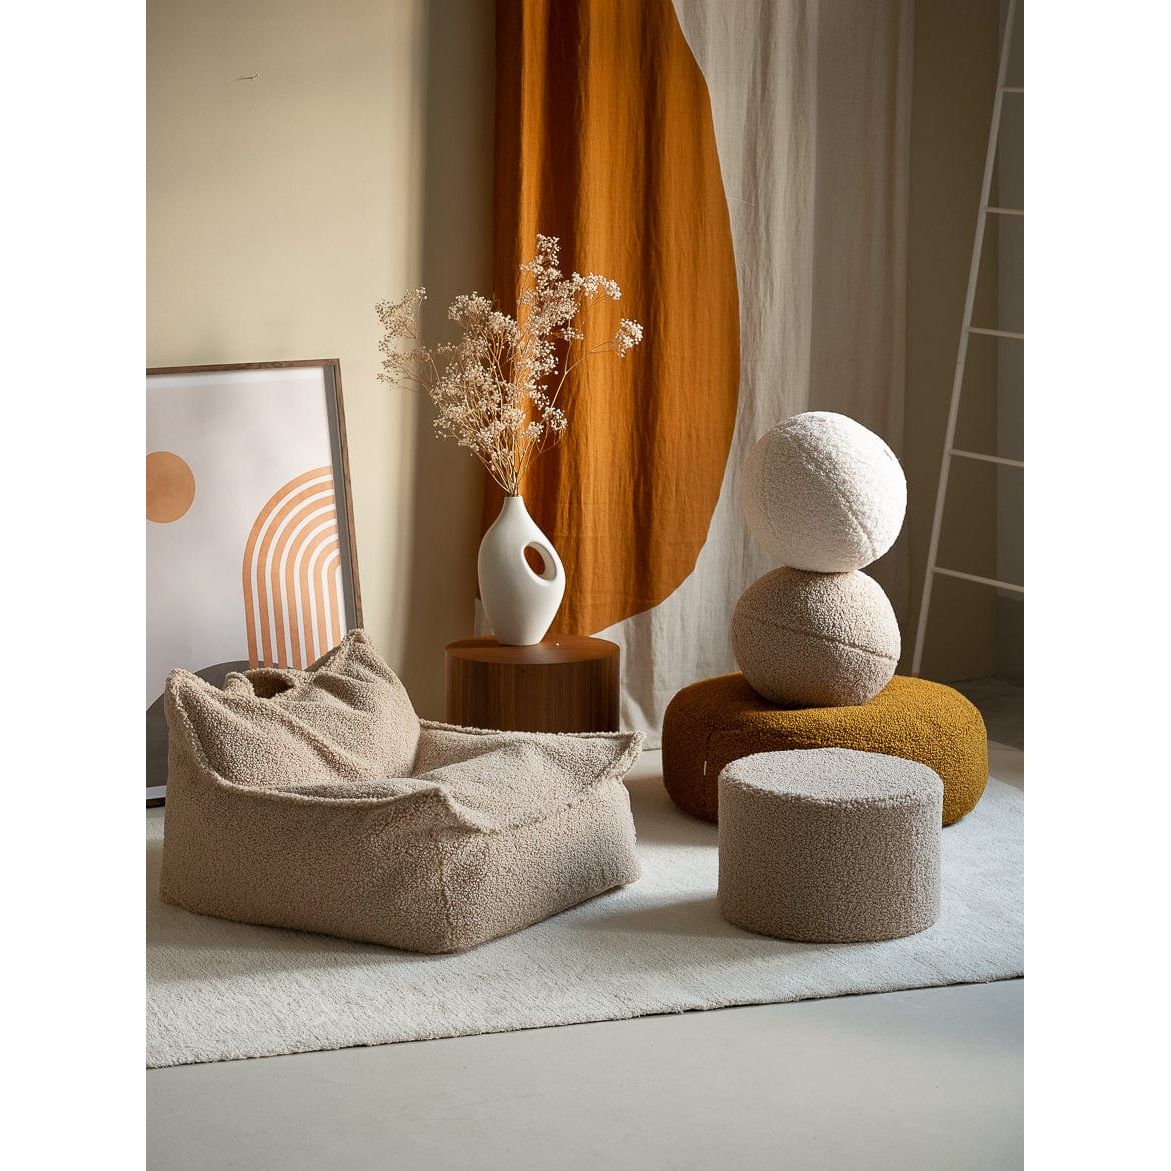 Wigiwama Biscuit Ball Cushion in room with beanbag chair and pouffe